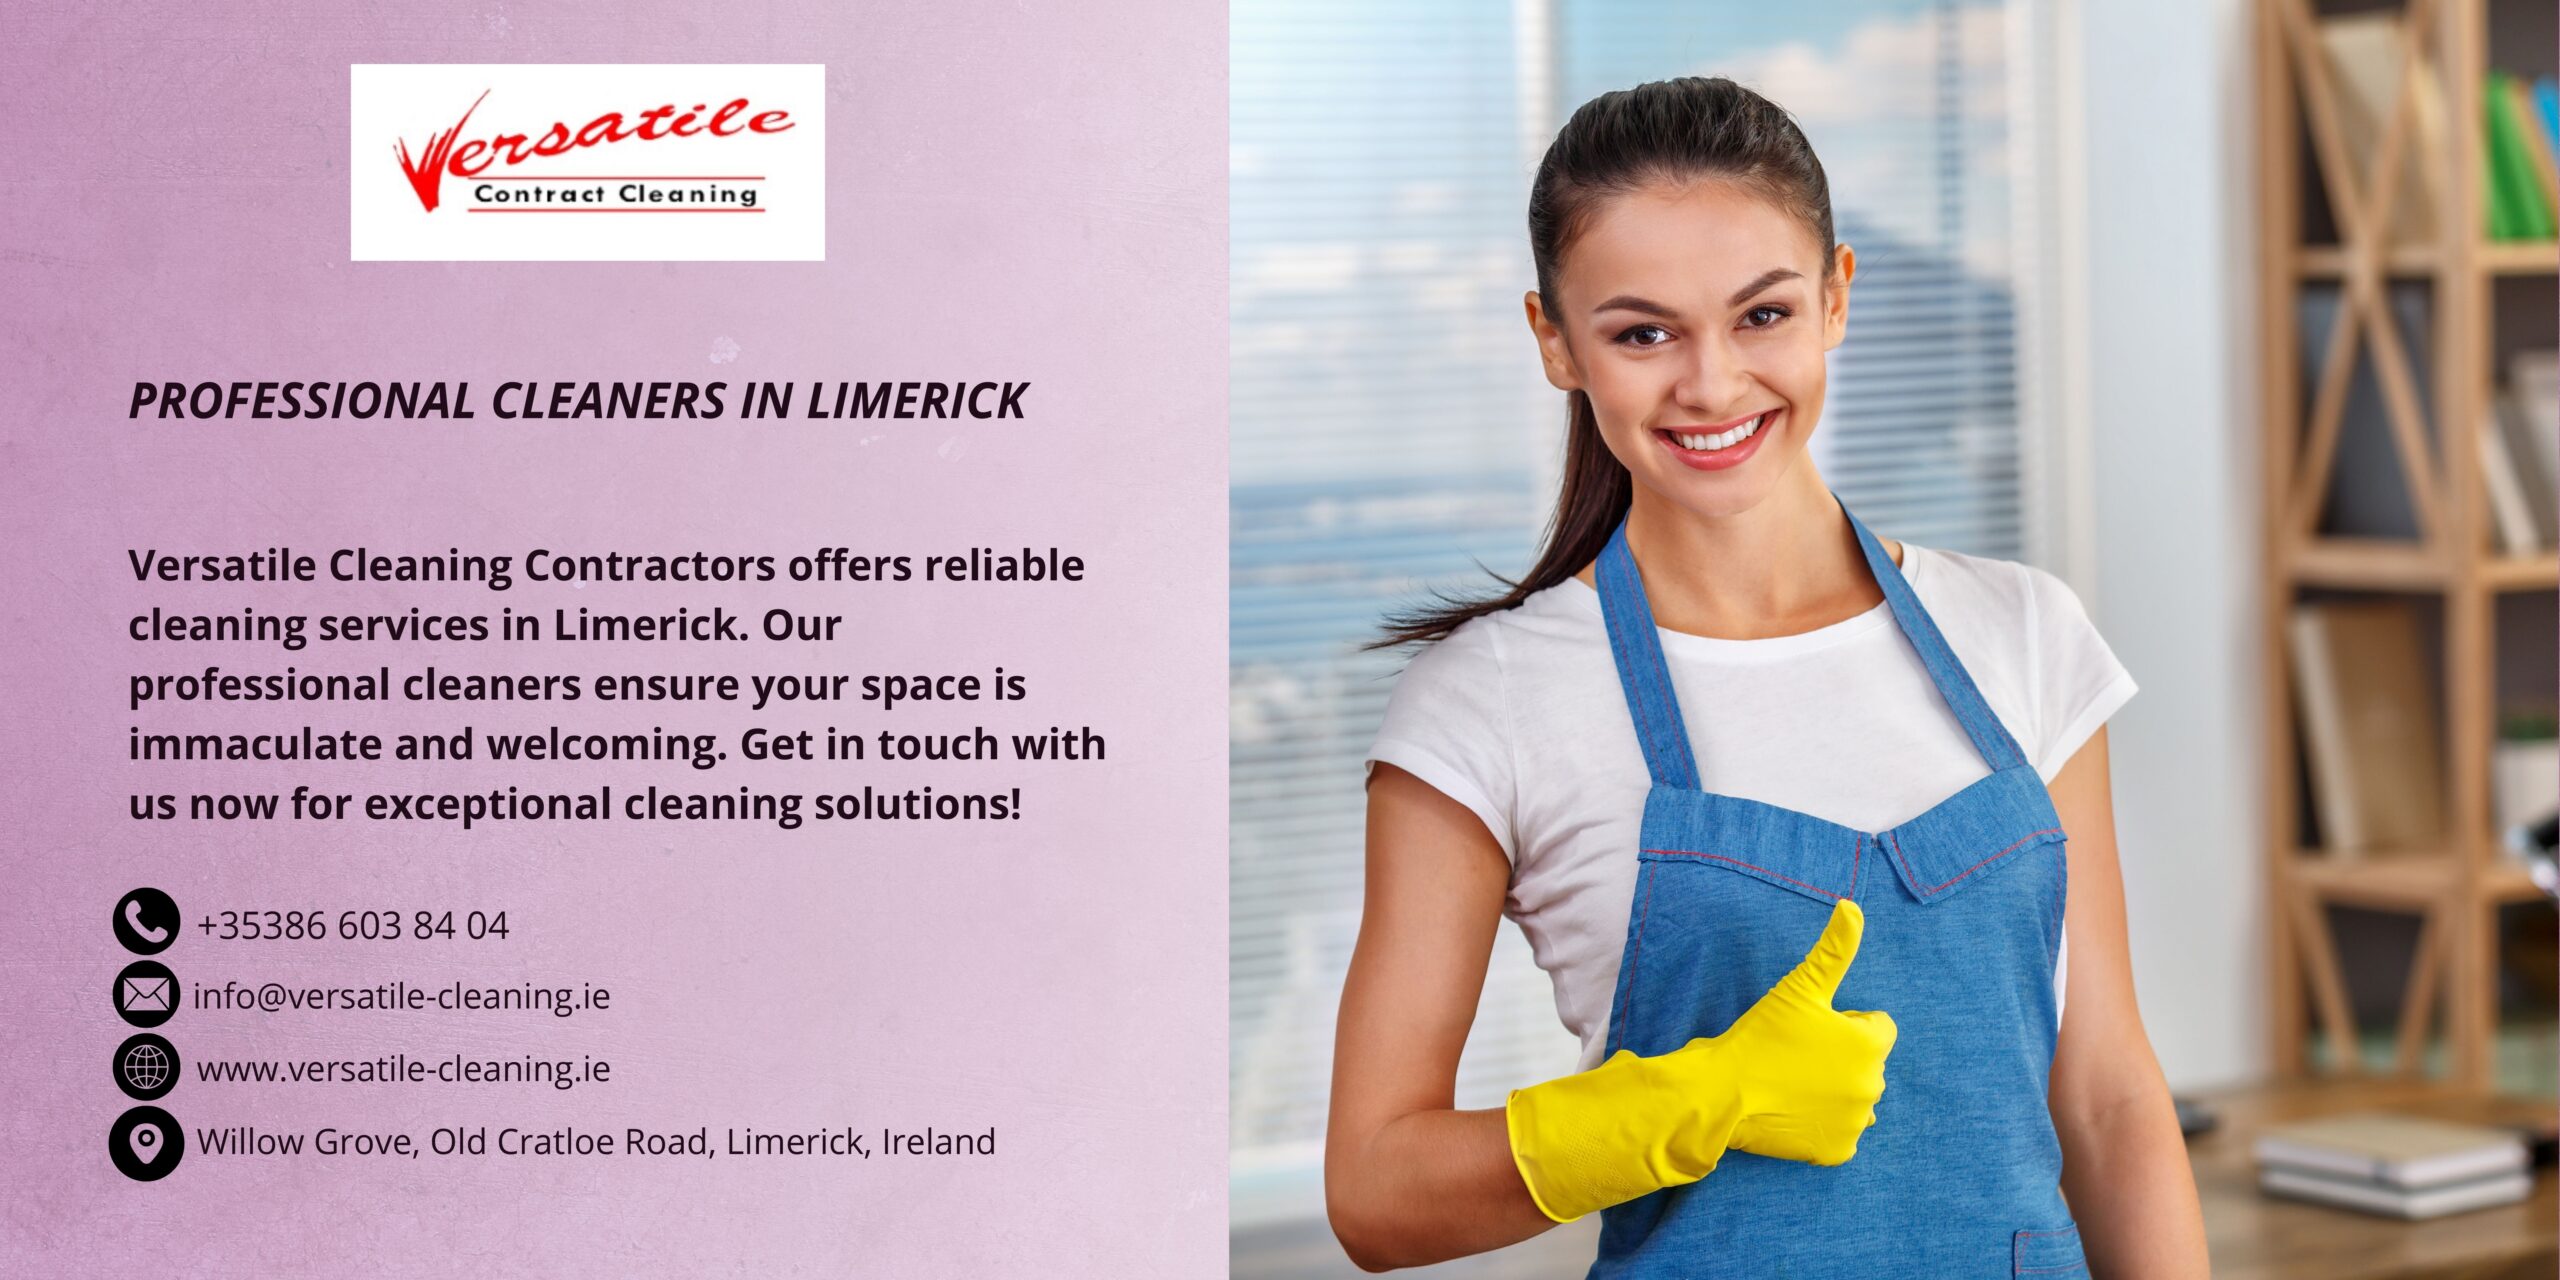 Professional Cleaners in Limerick